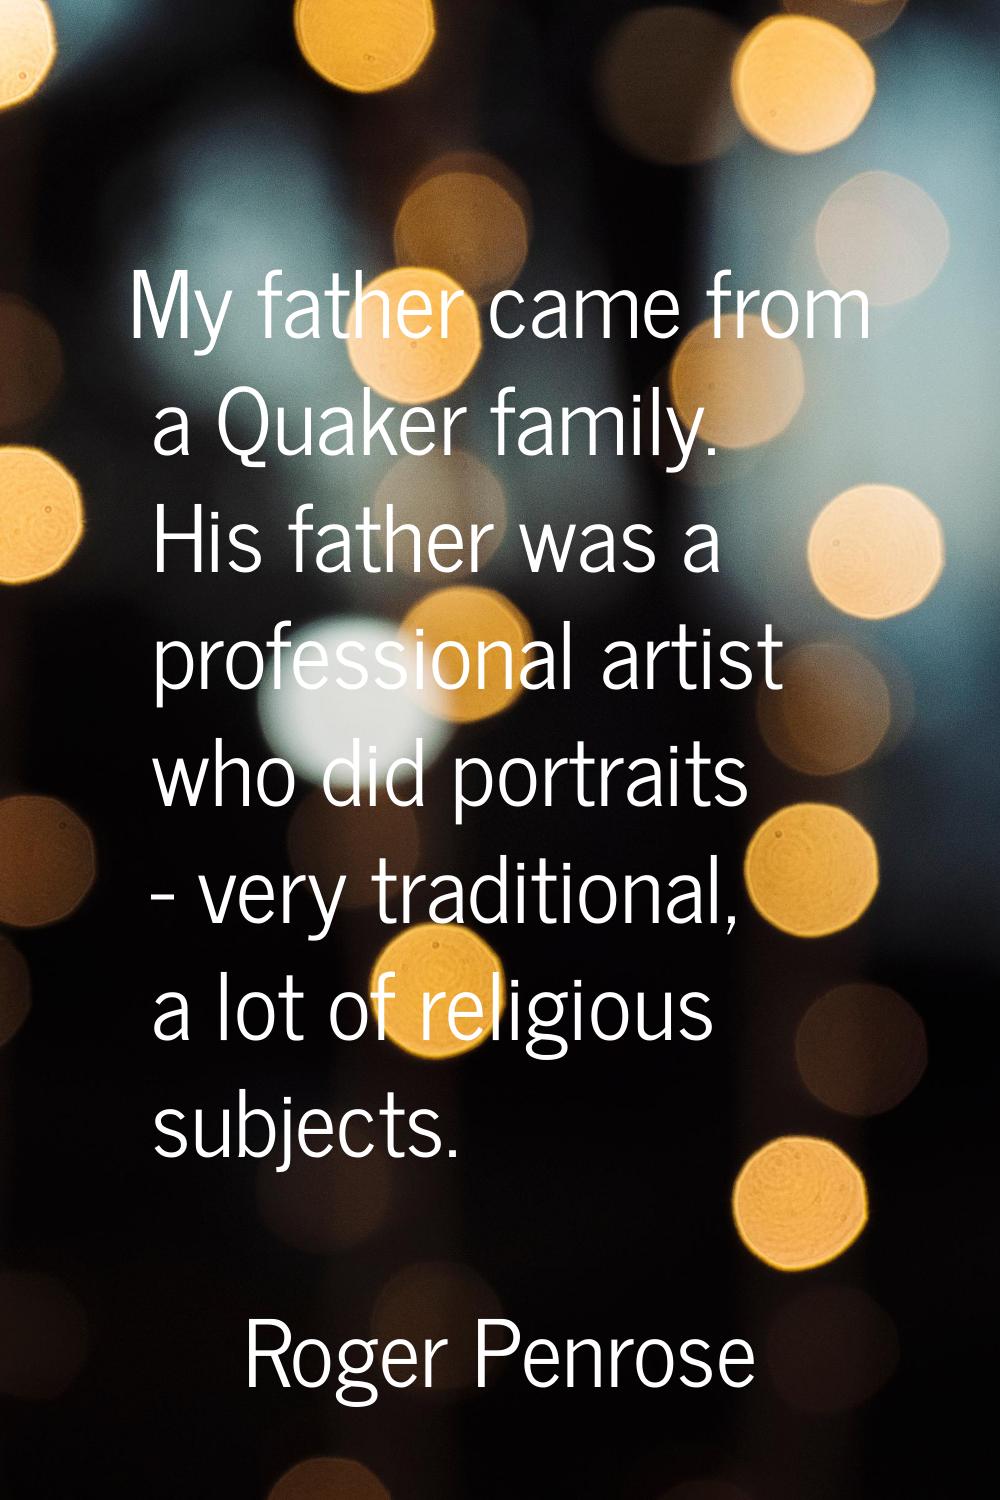 My father came from a Quaker family. His father was a professional artist who did portraits - very 